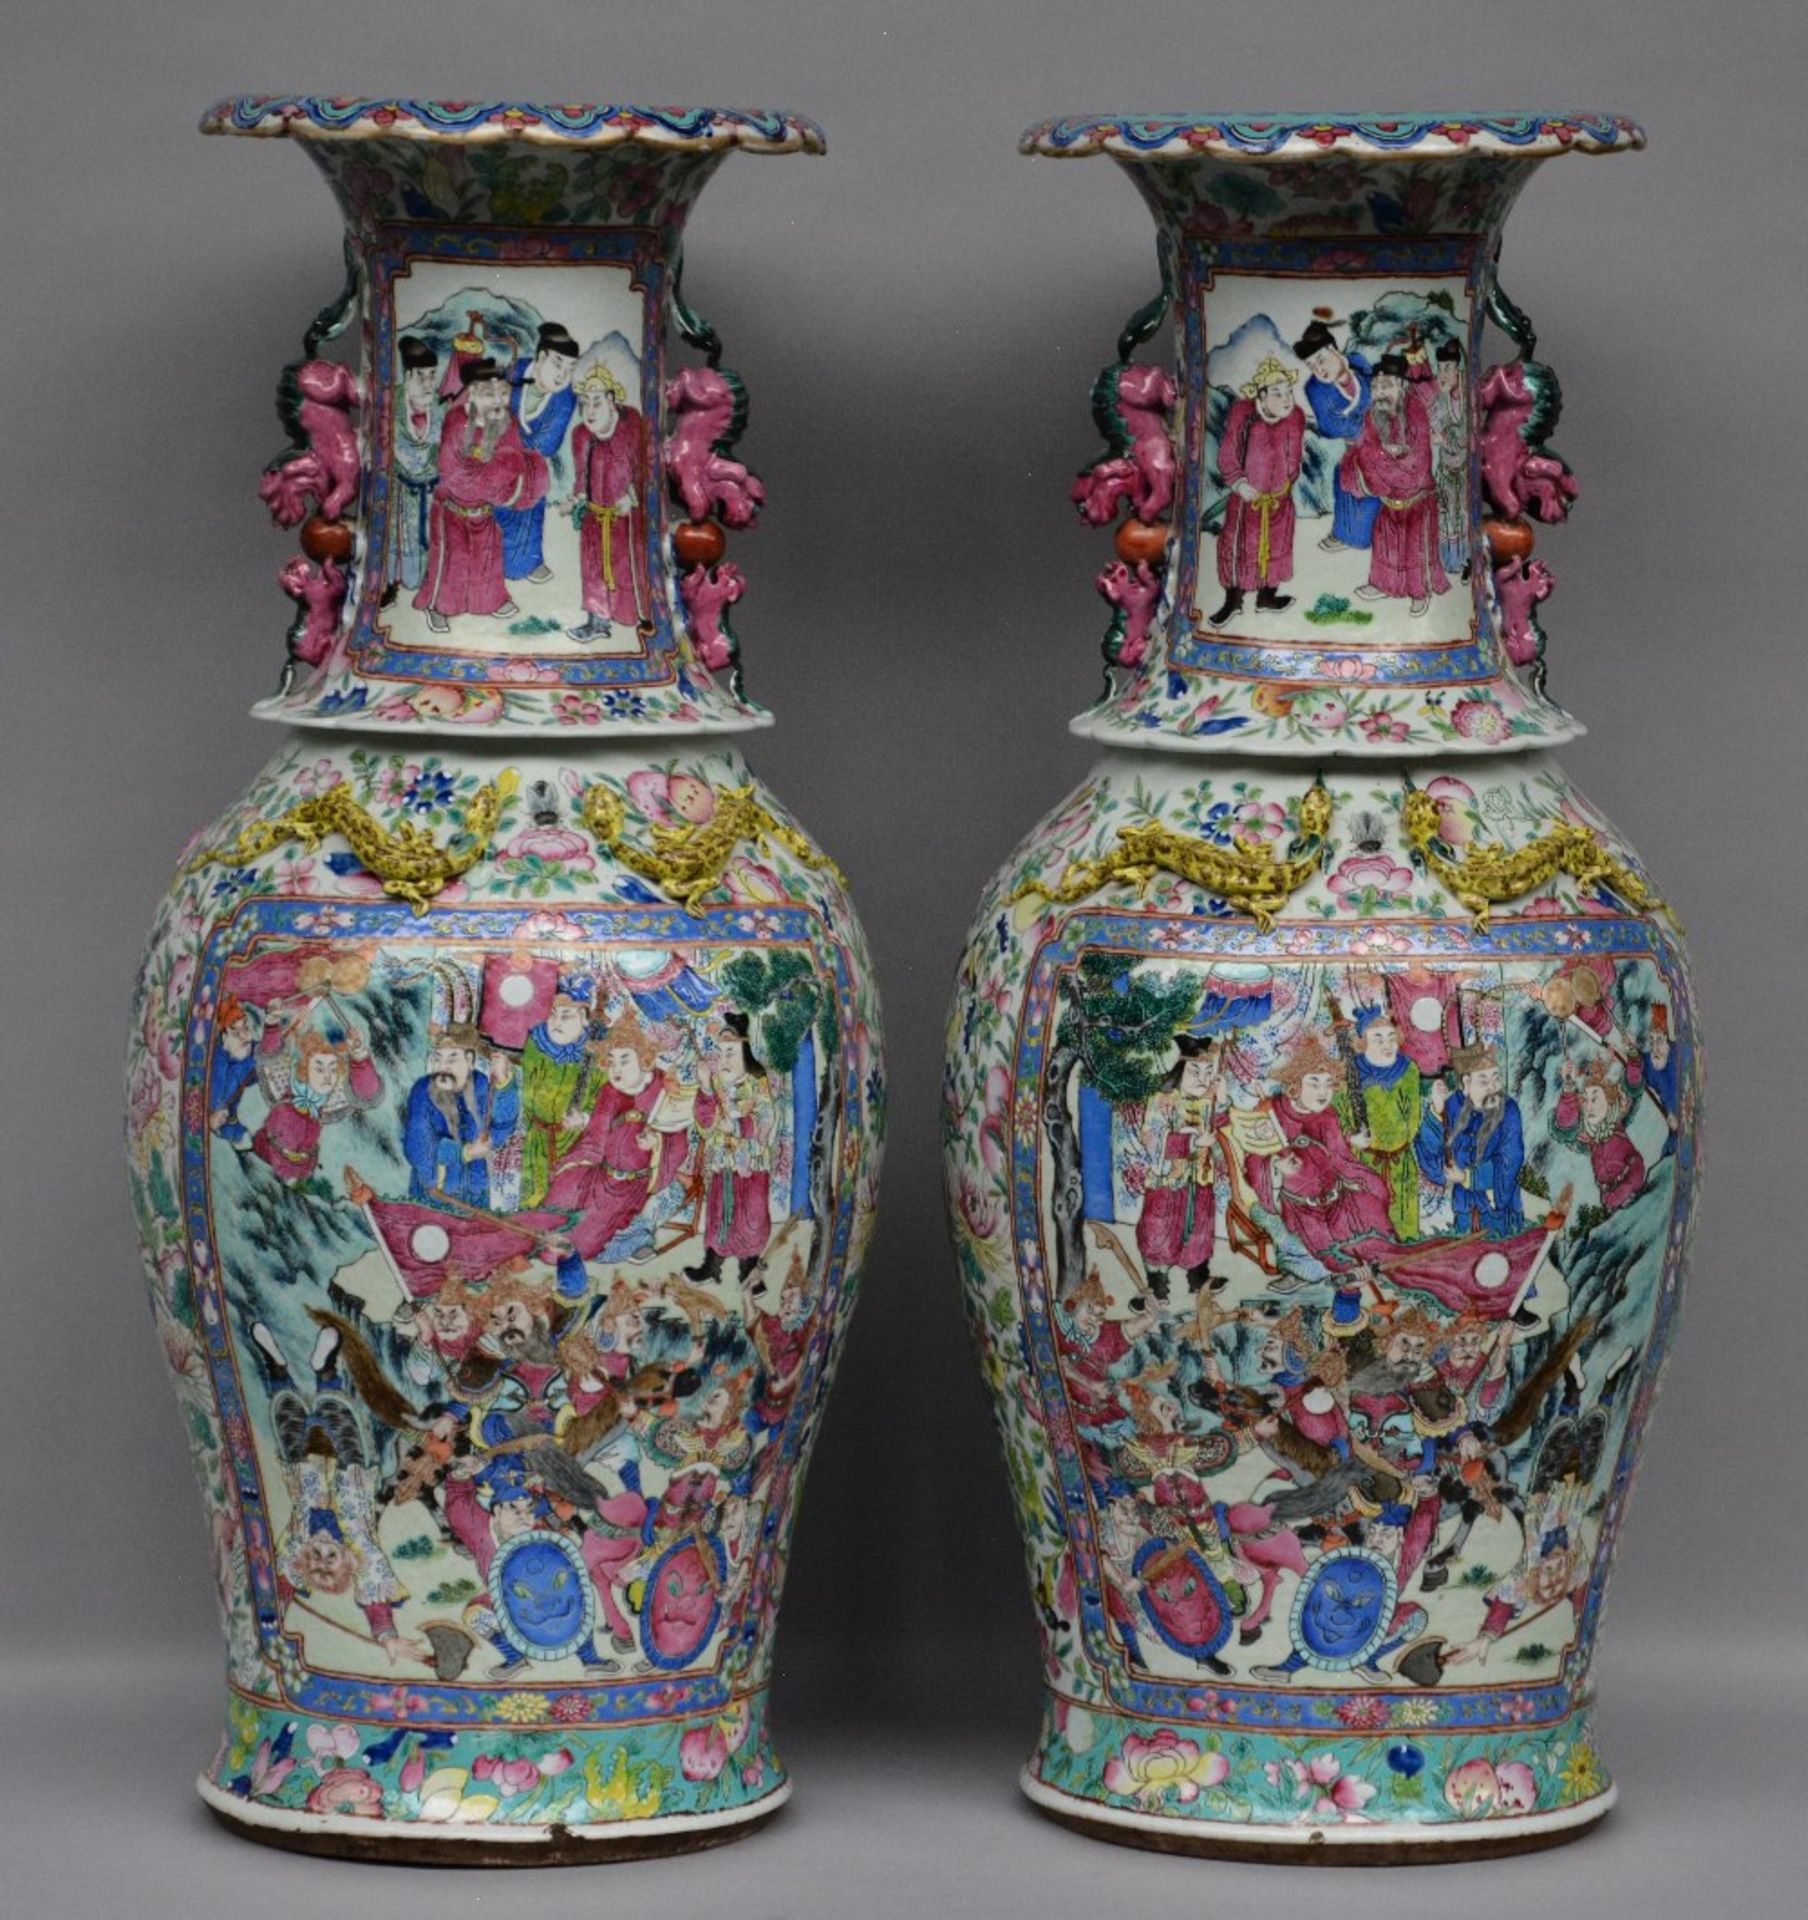 A pair of Chinese impressive famille rose vases, decorated with warriors and a court scene, one vase